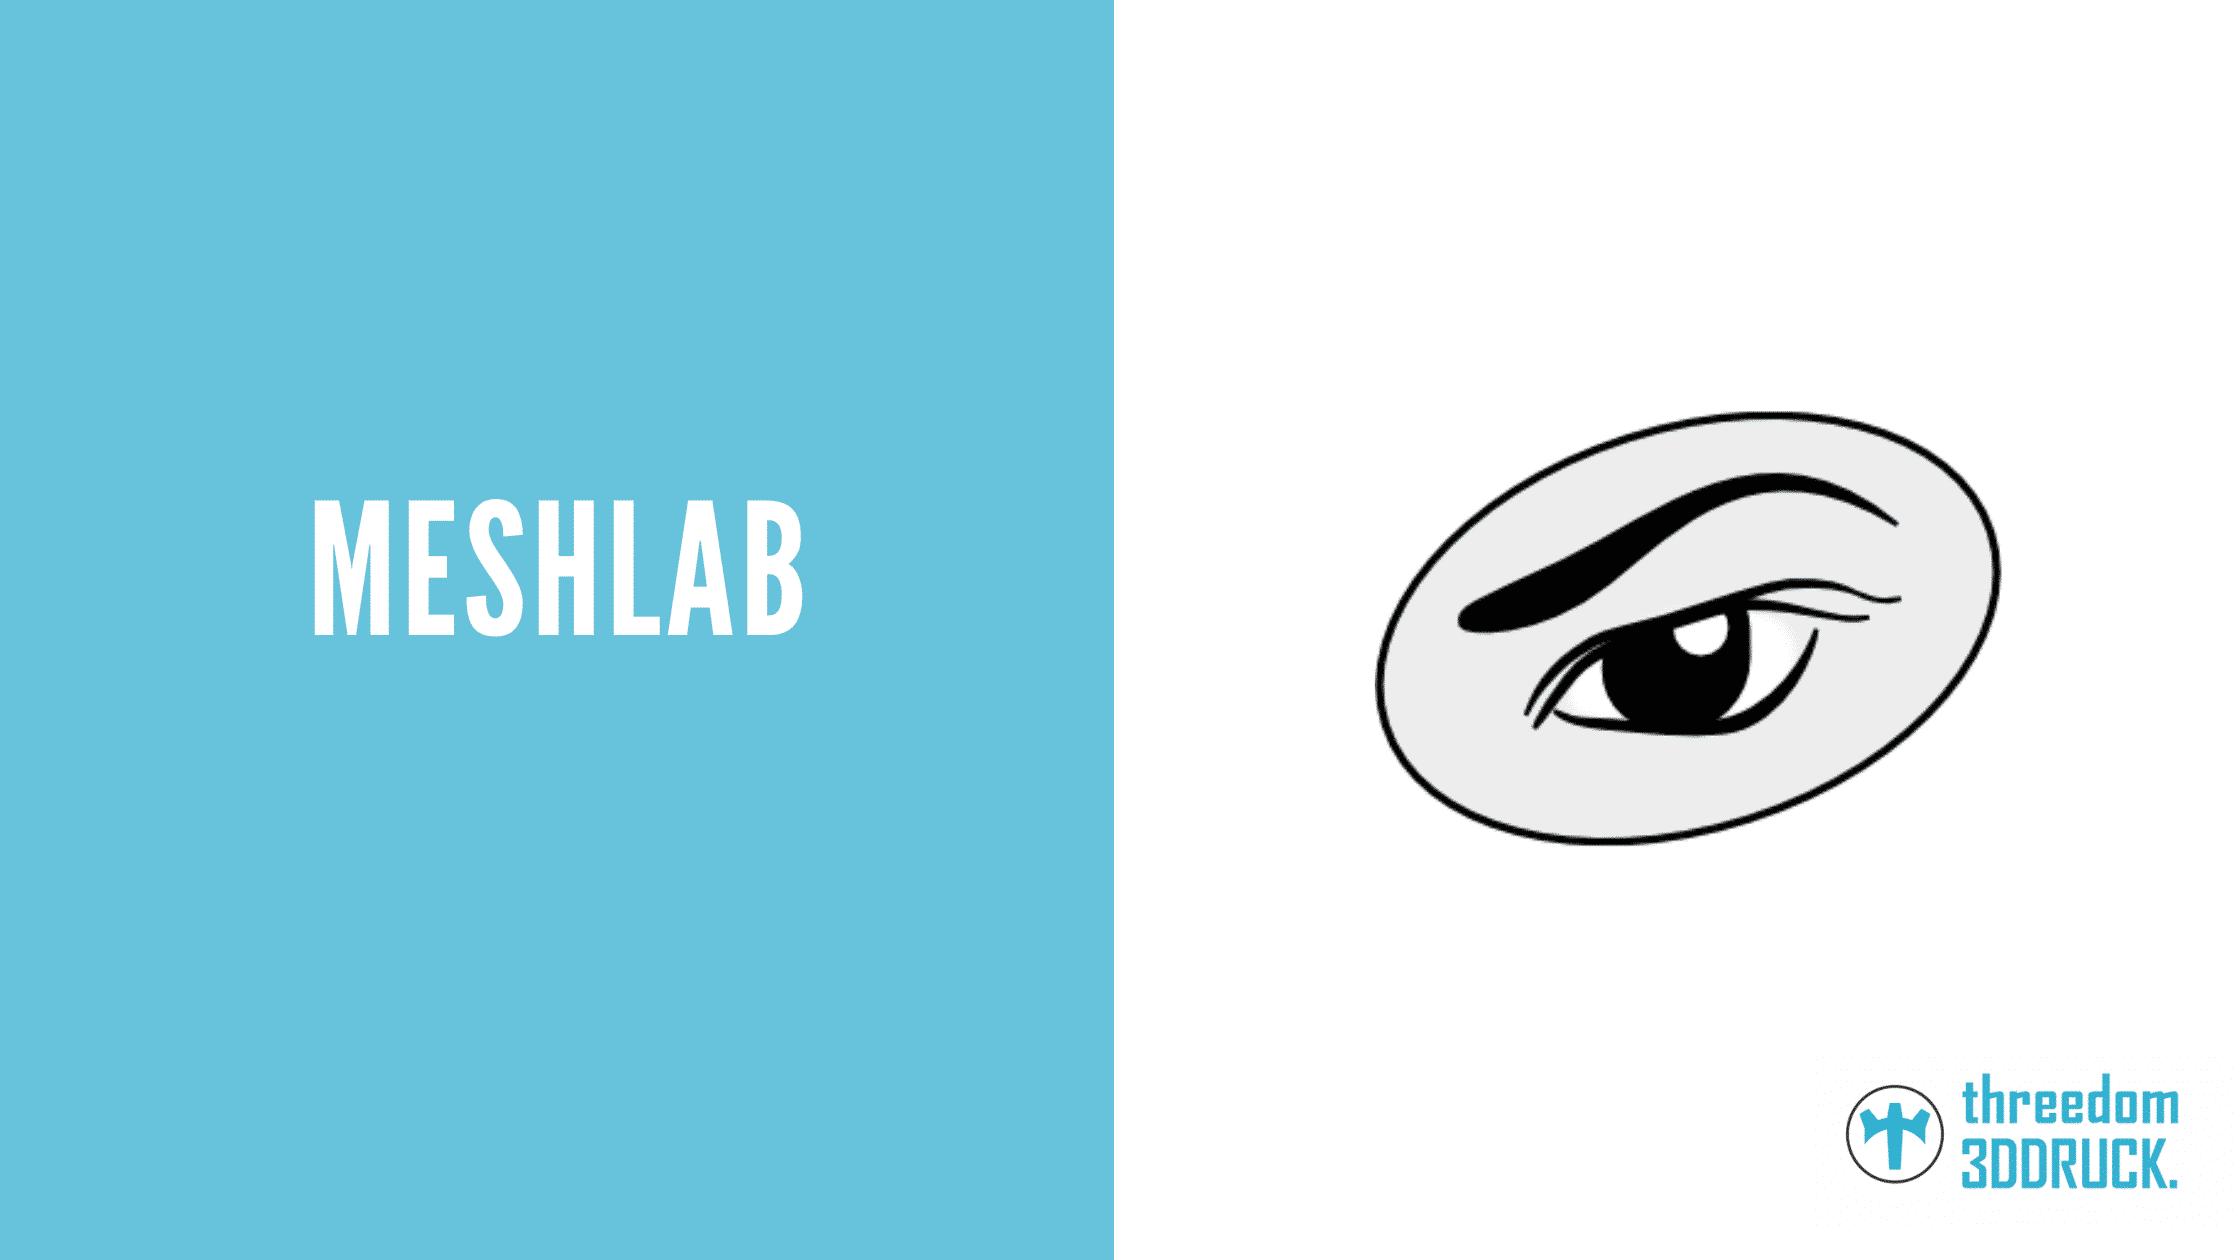 Meshlab: definition, functionality and scope